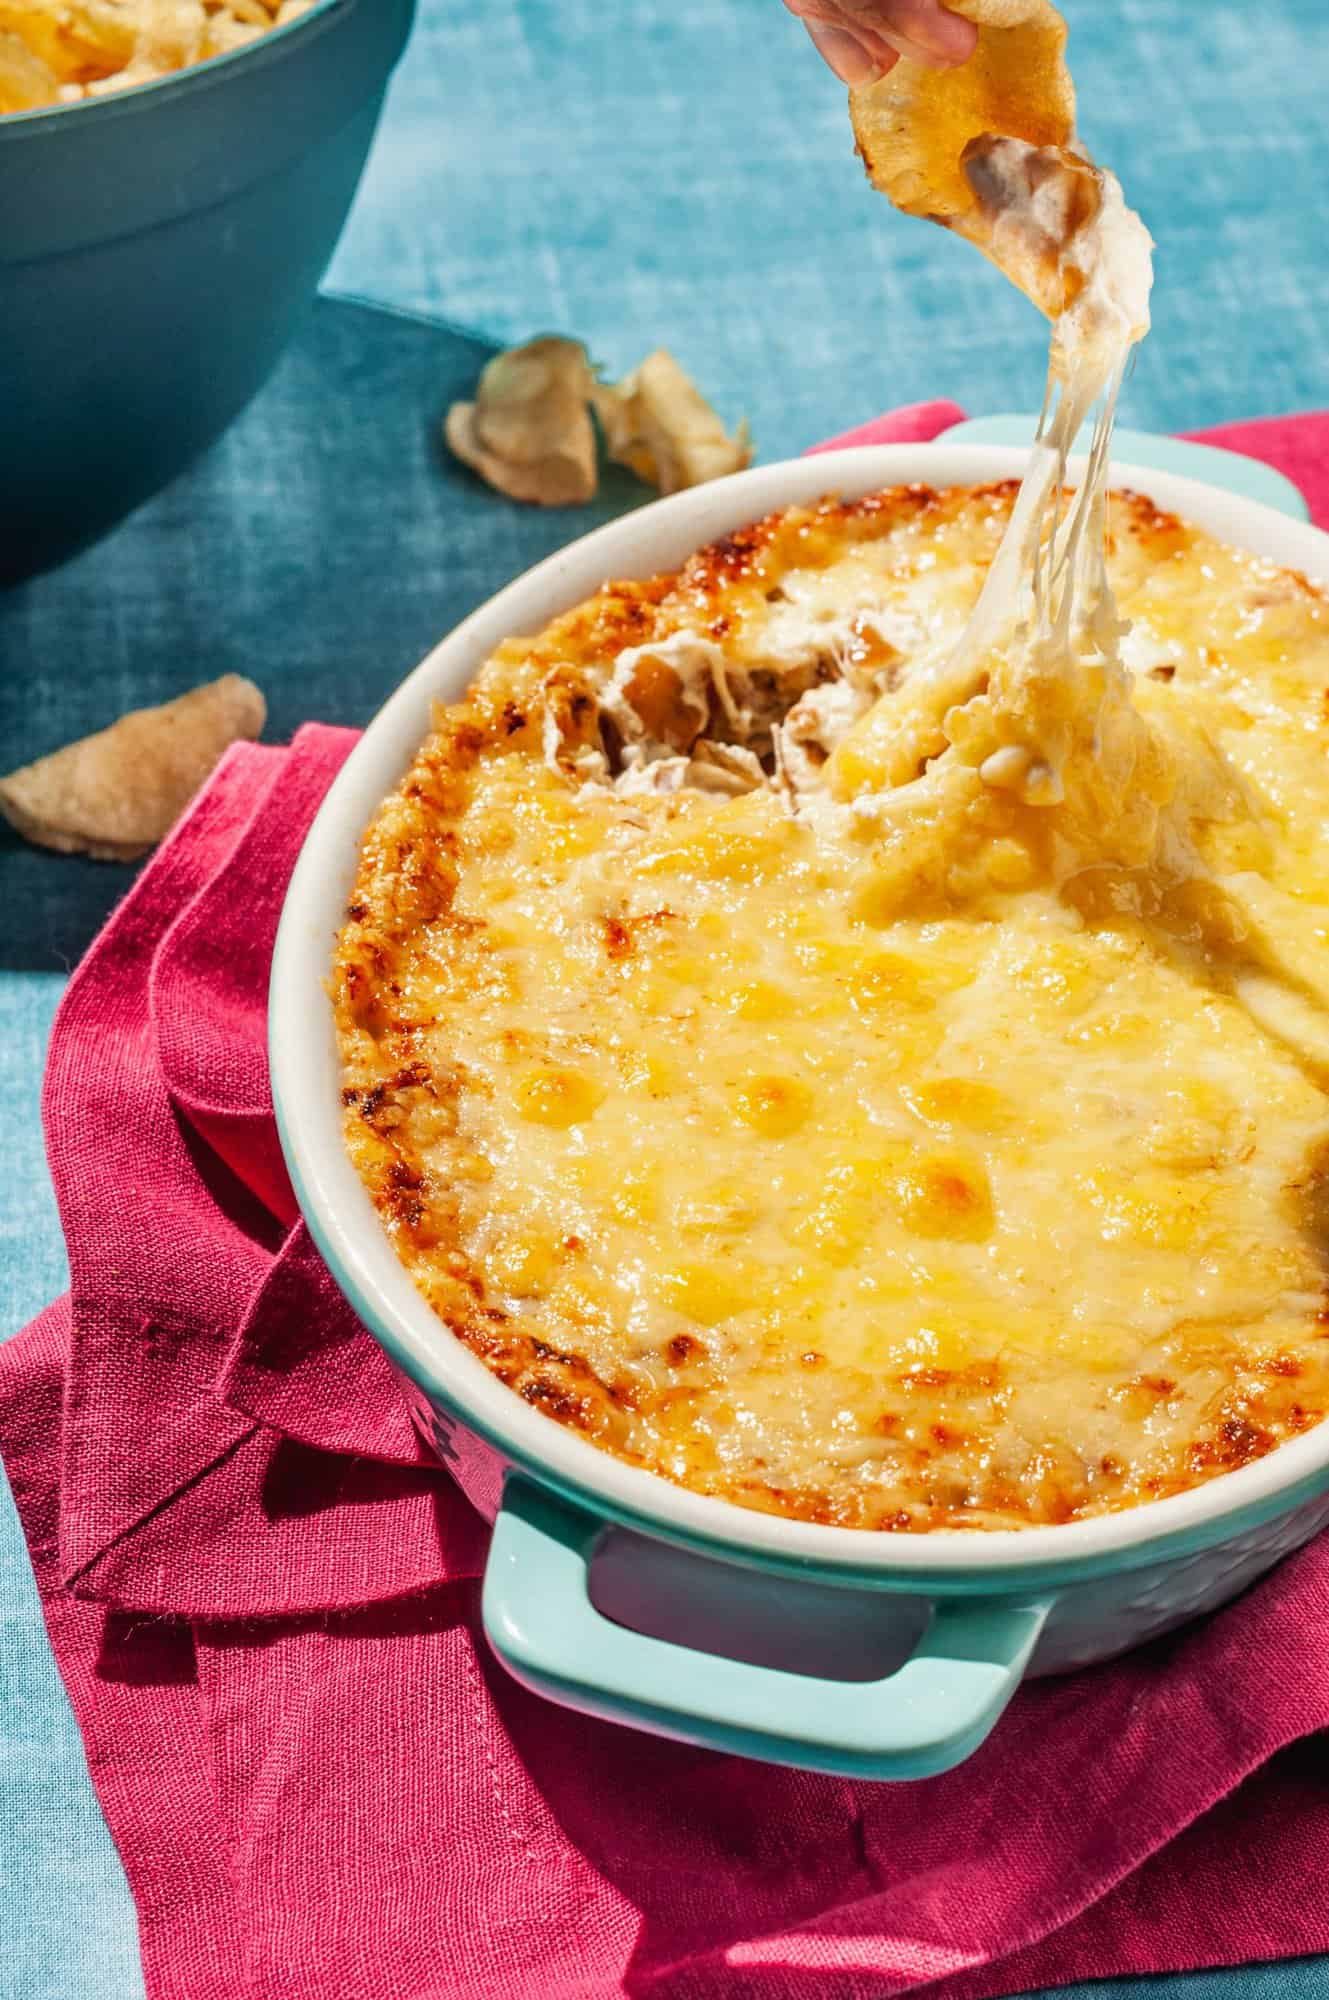 dipping chip into cheesy baked caramelized onion dip